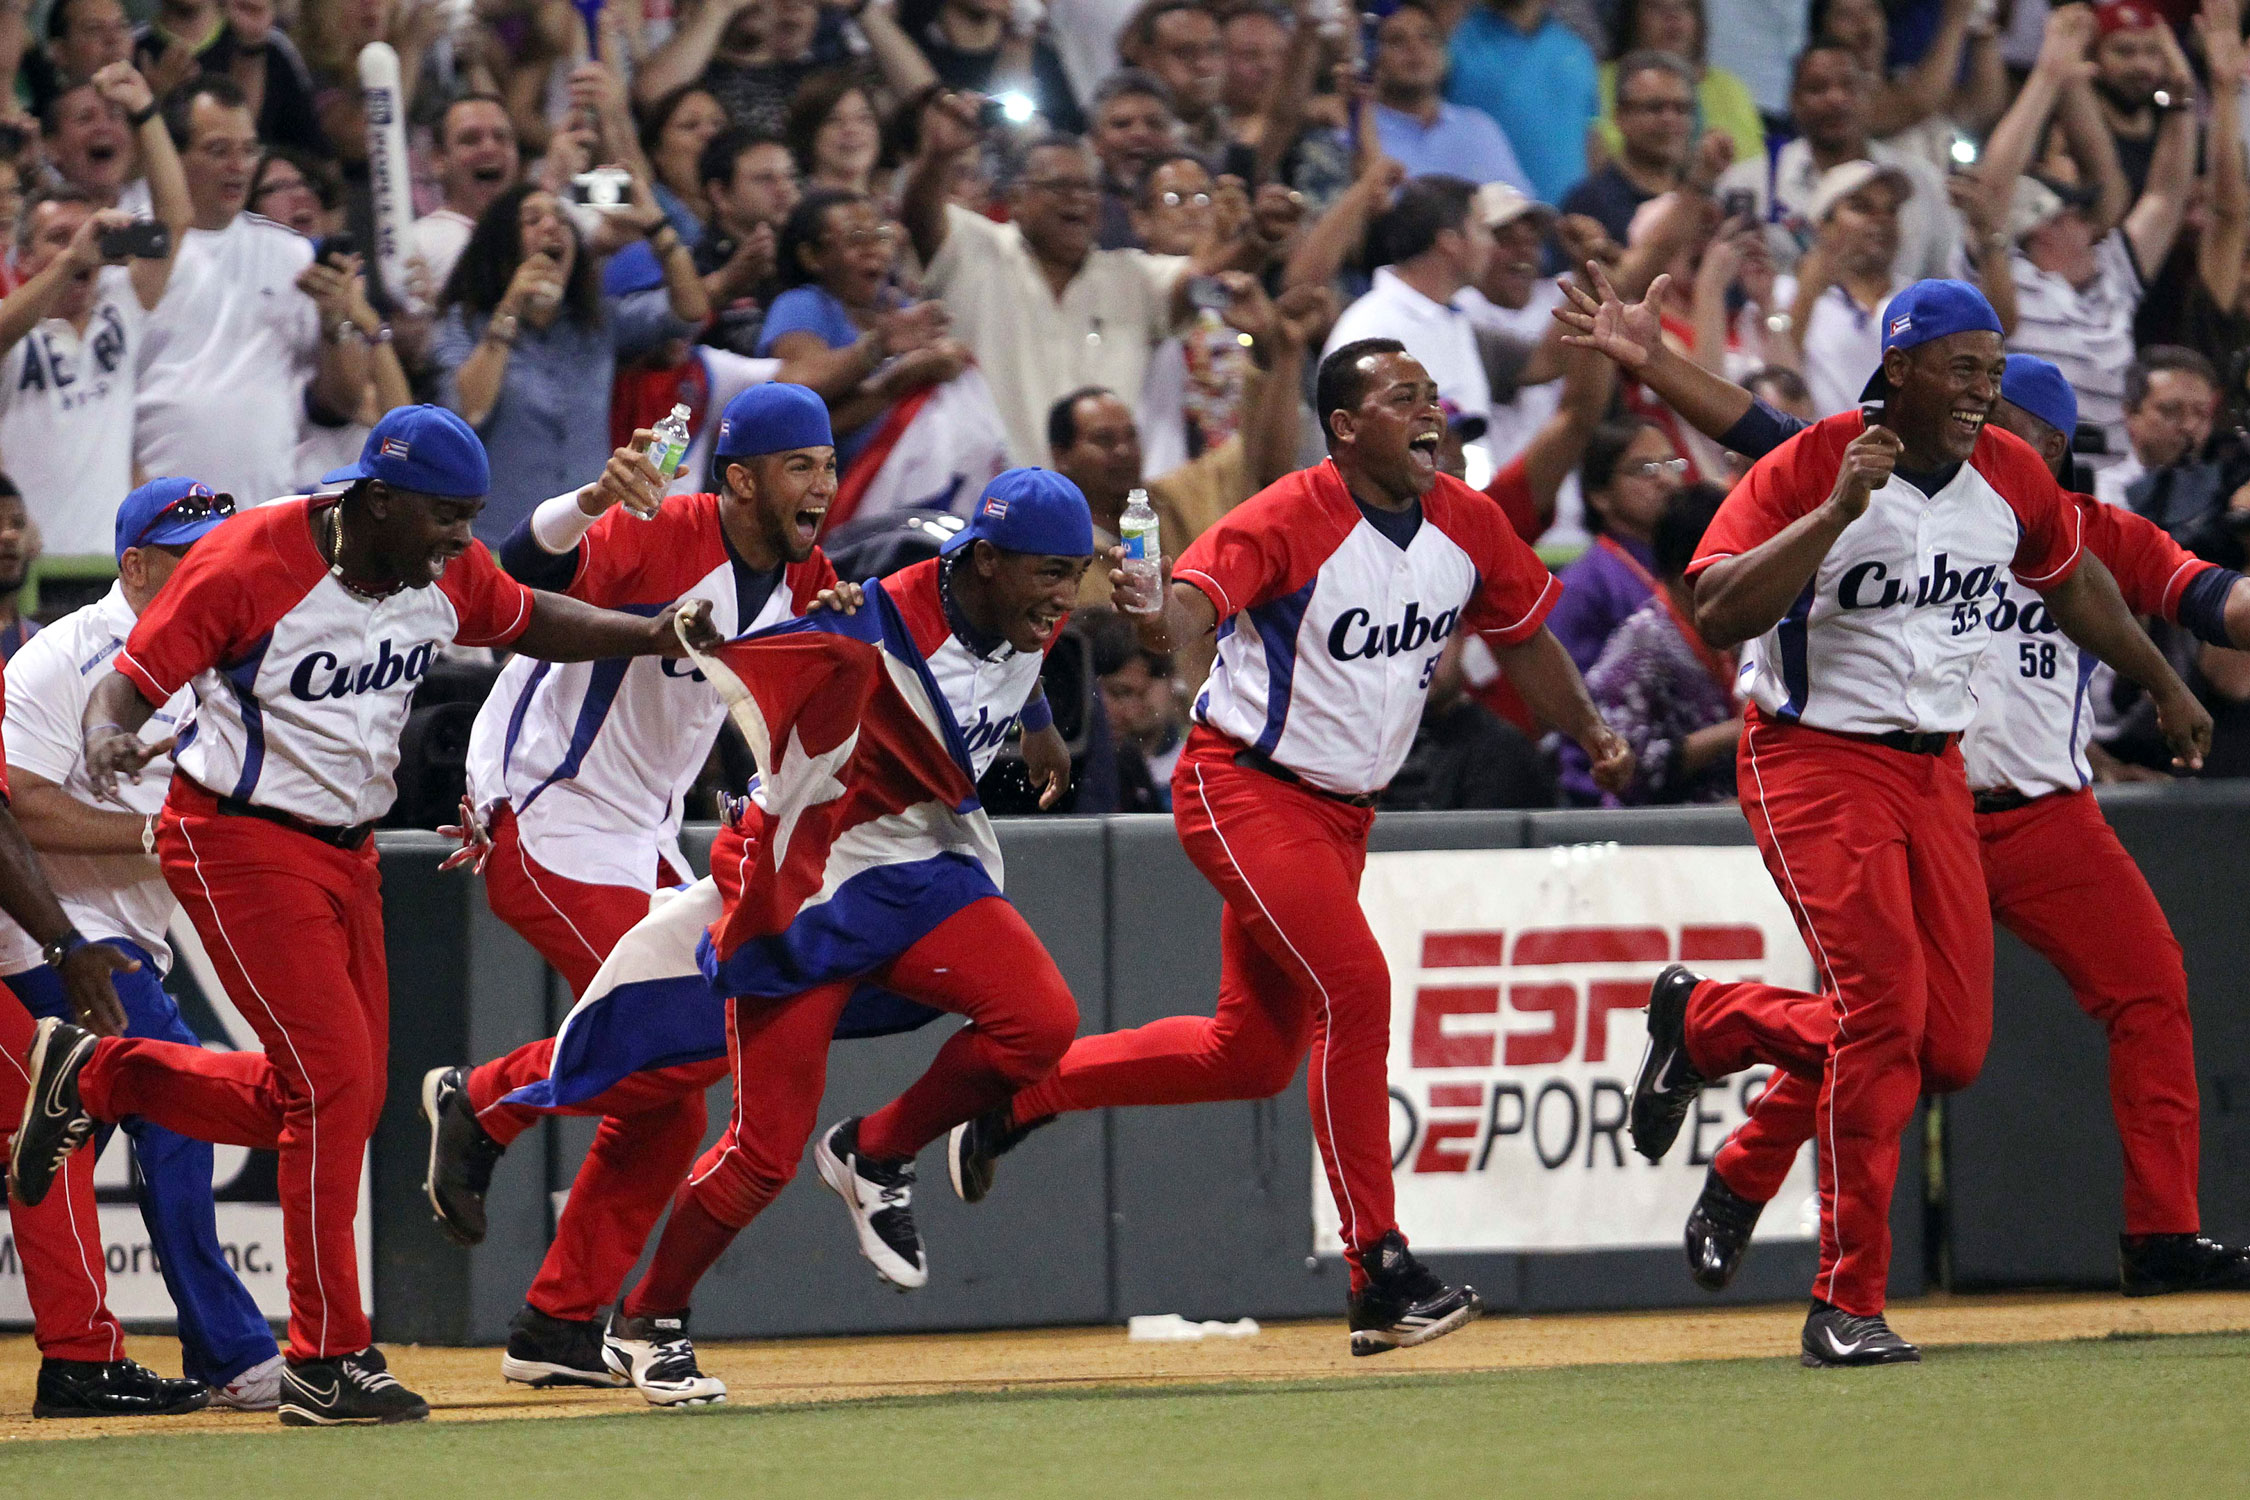 How U.S.Cuba relations are shifting the landscape of Major League